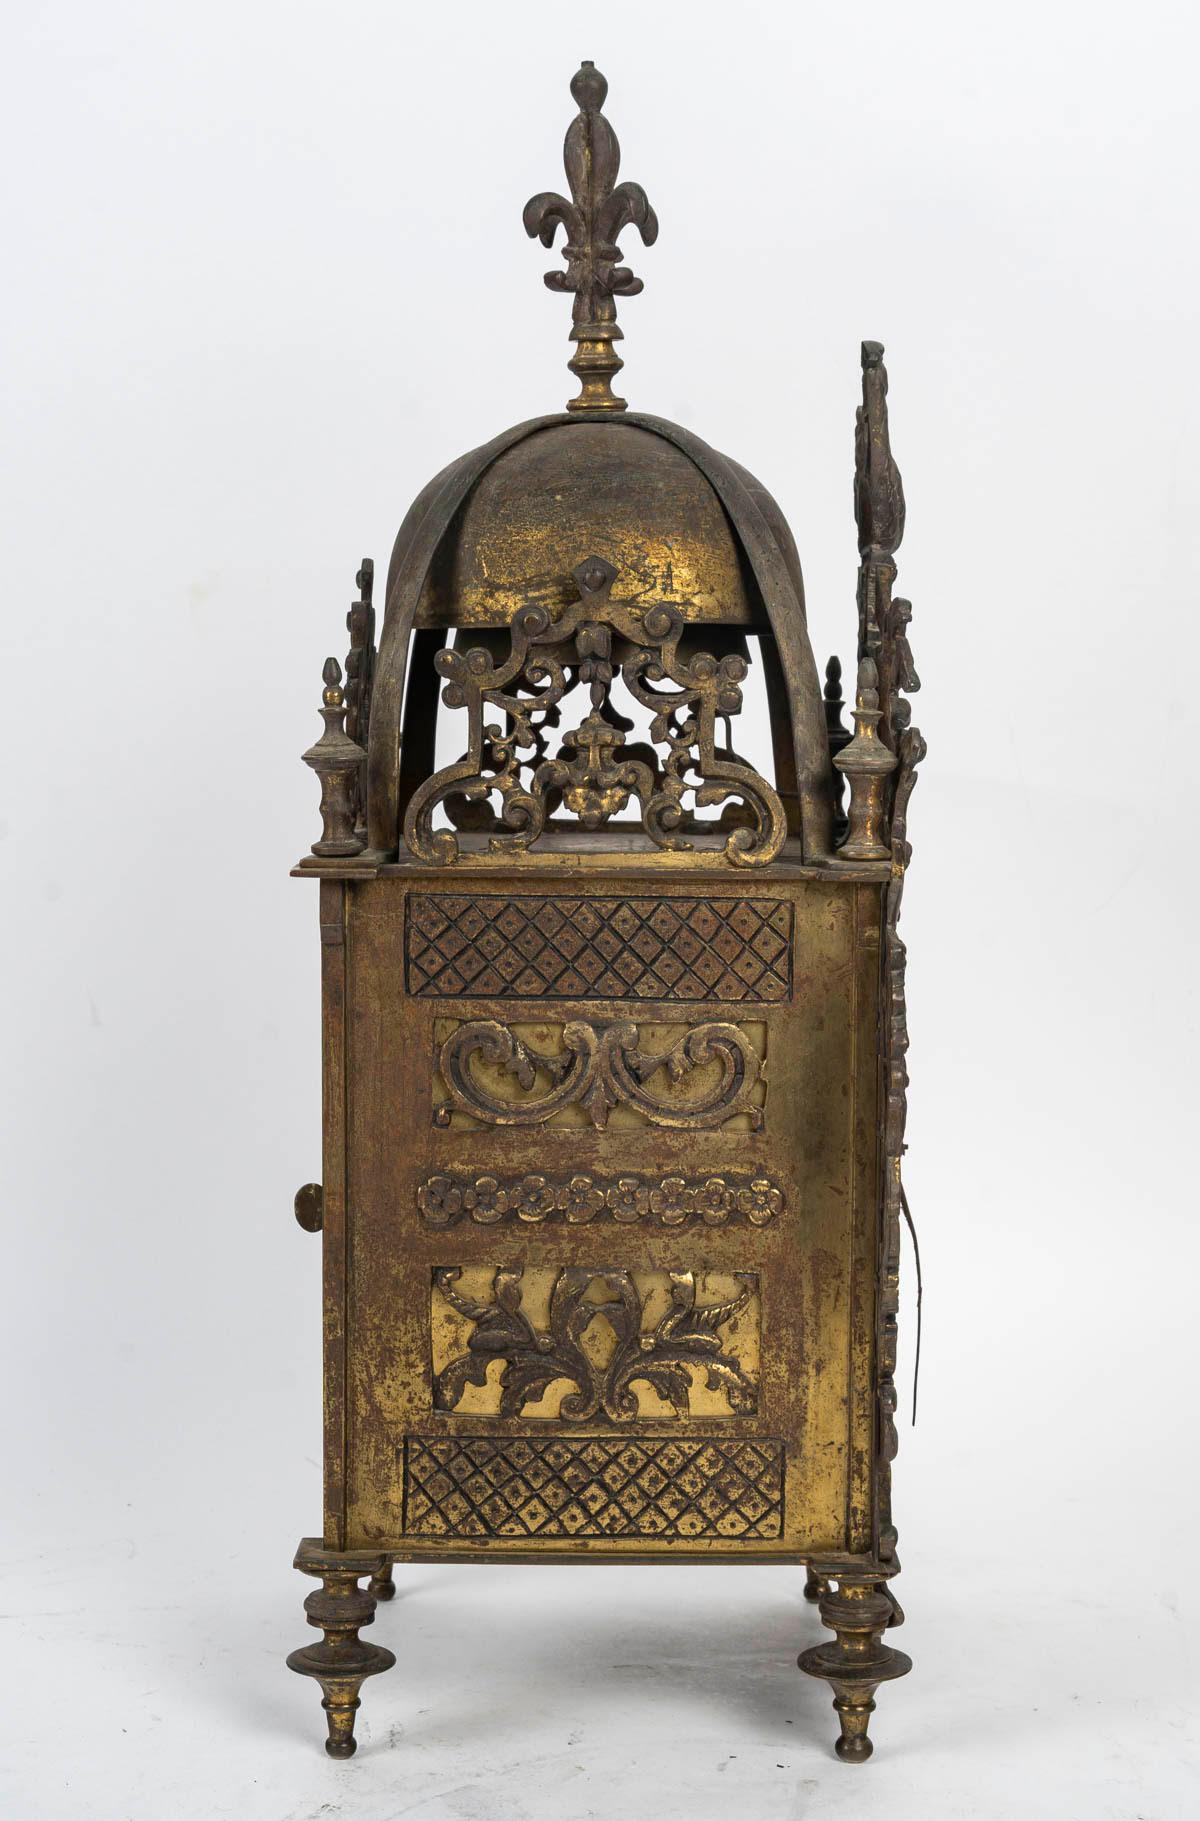 Brass 18th Century Bell Clock, Mechanism Signed by Huy Angers.